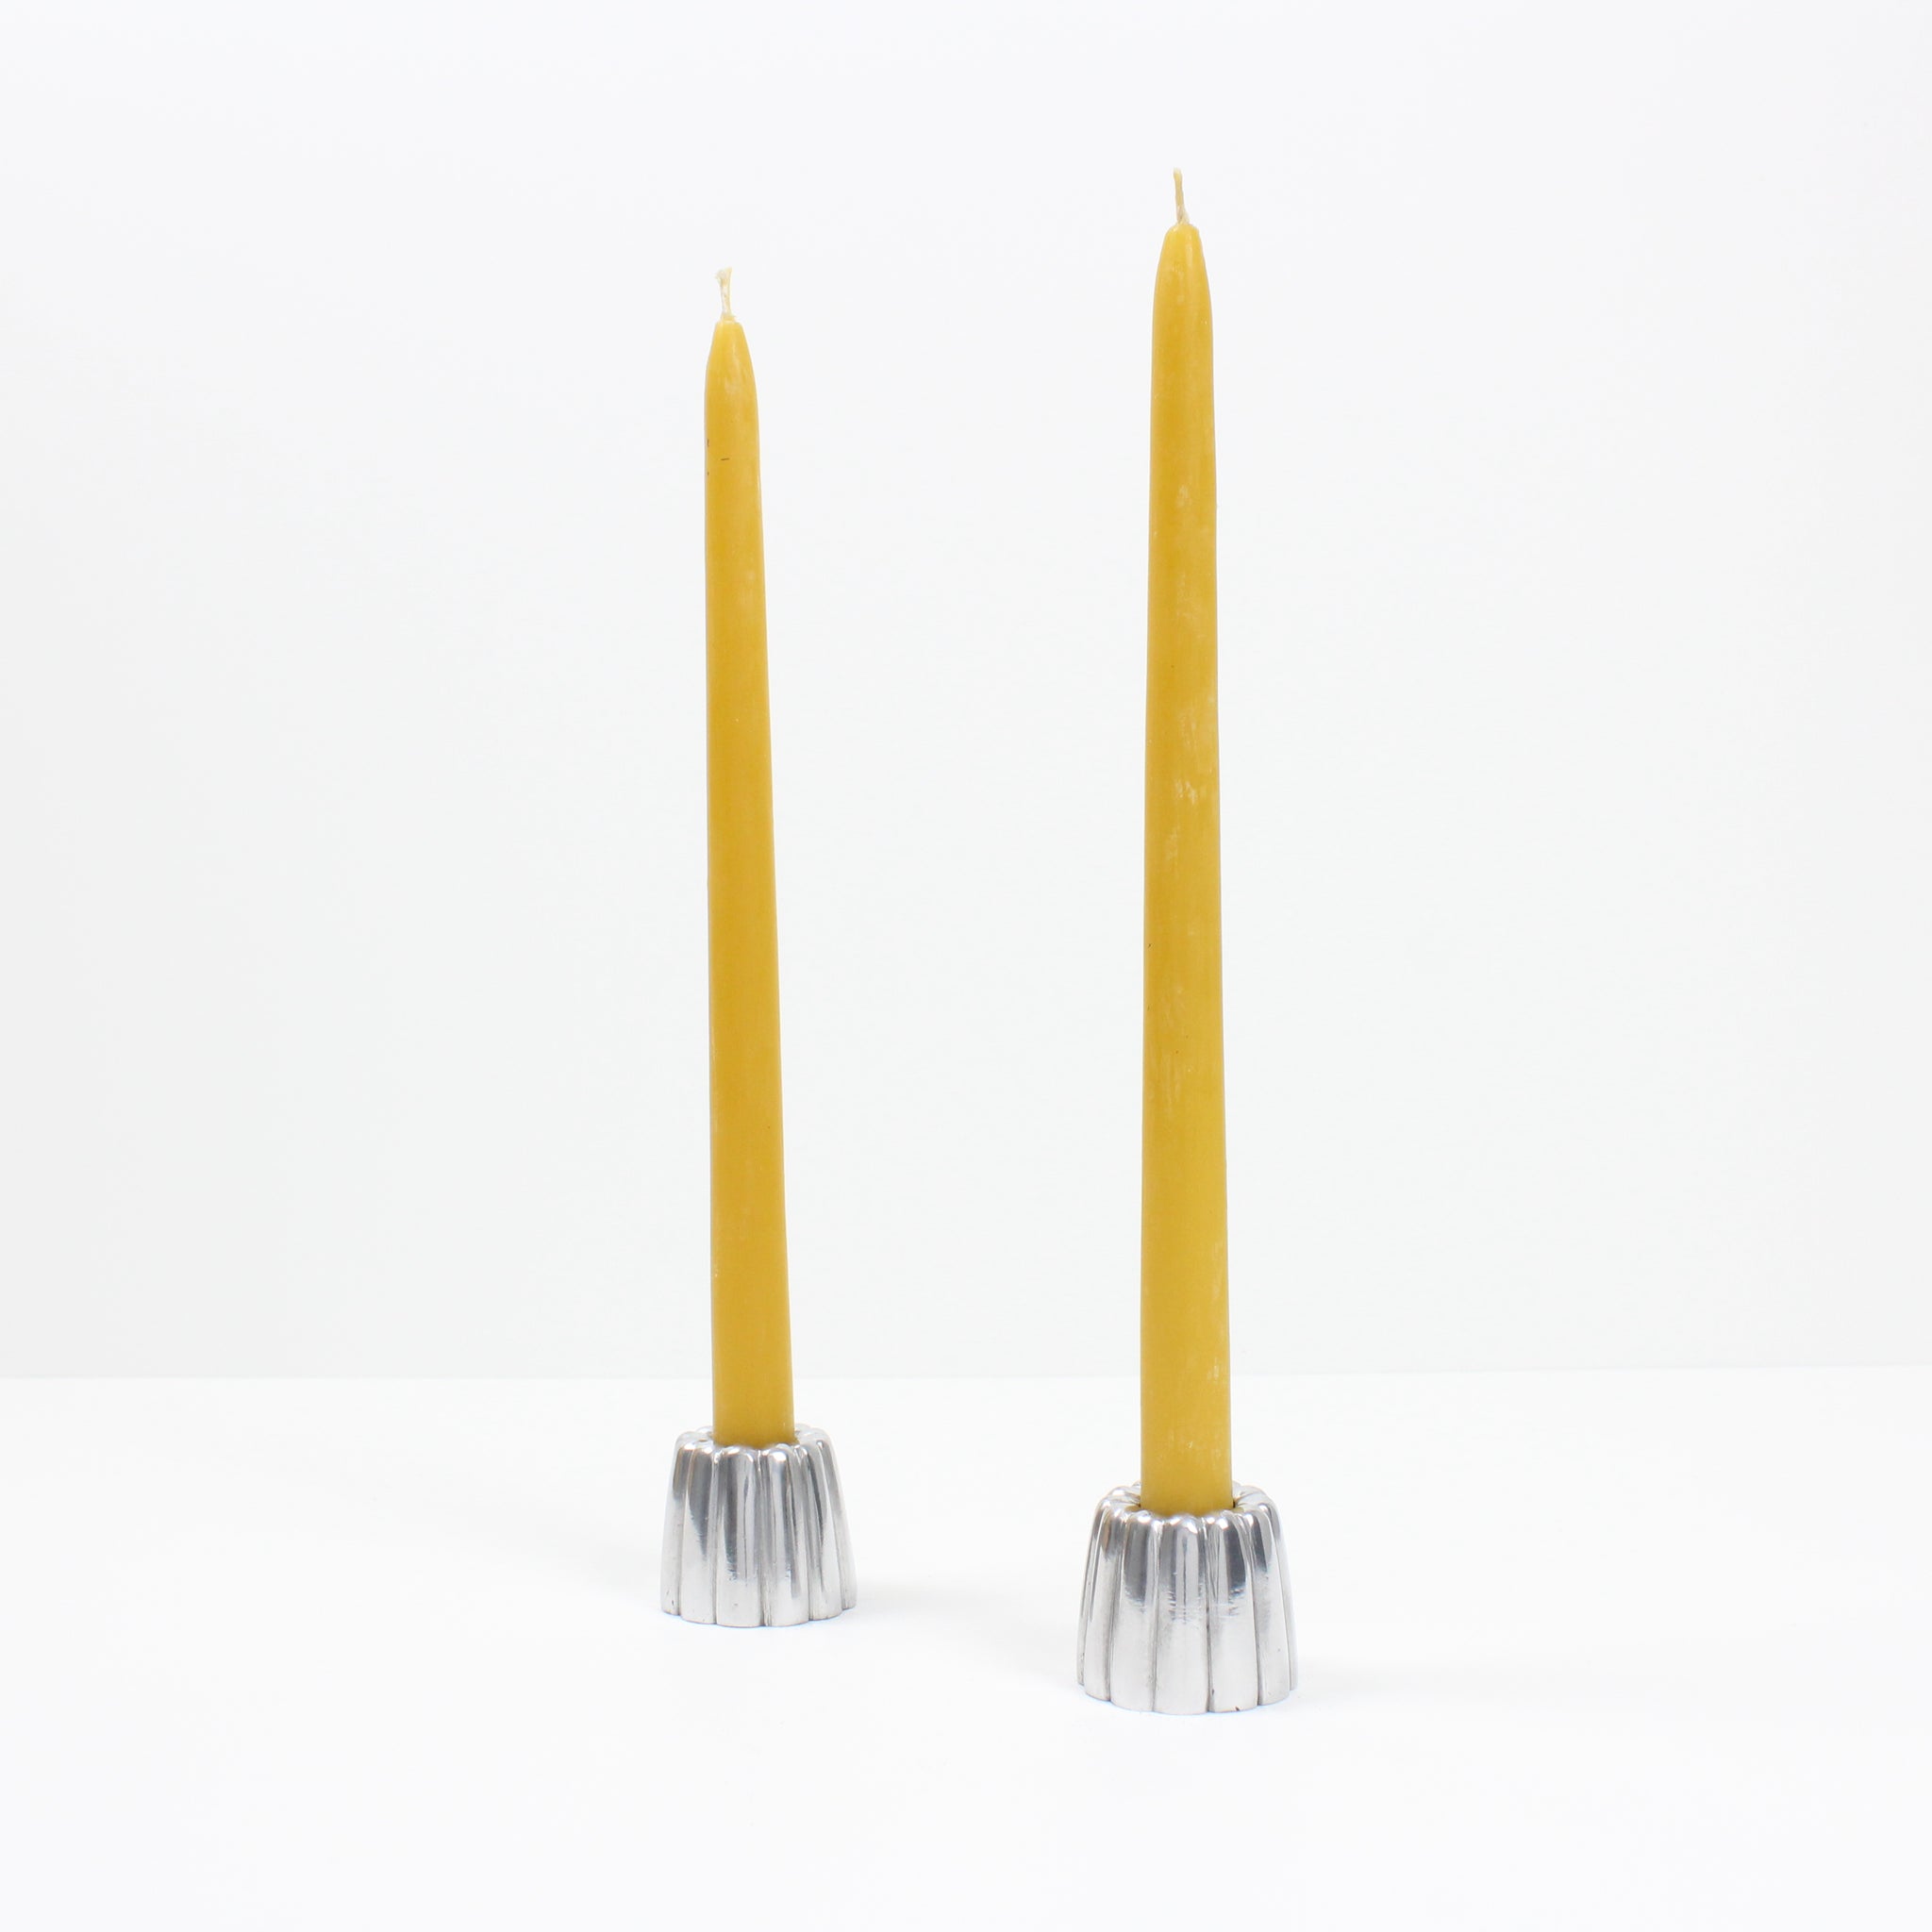 Organic Beeswax Dinner Candles